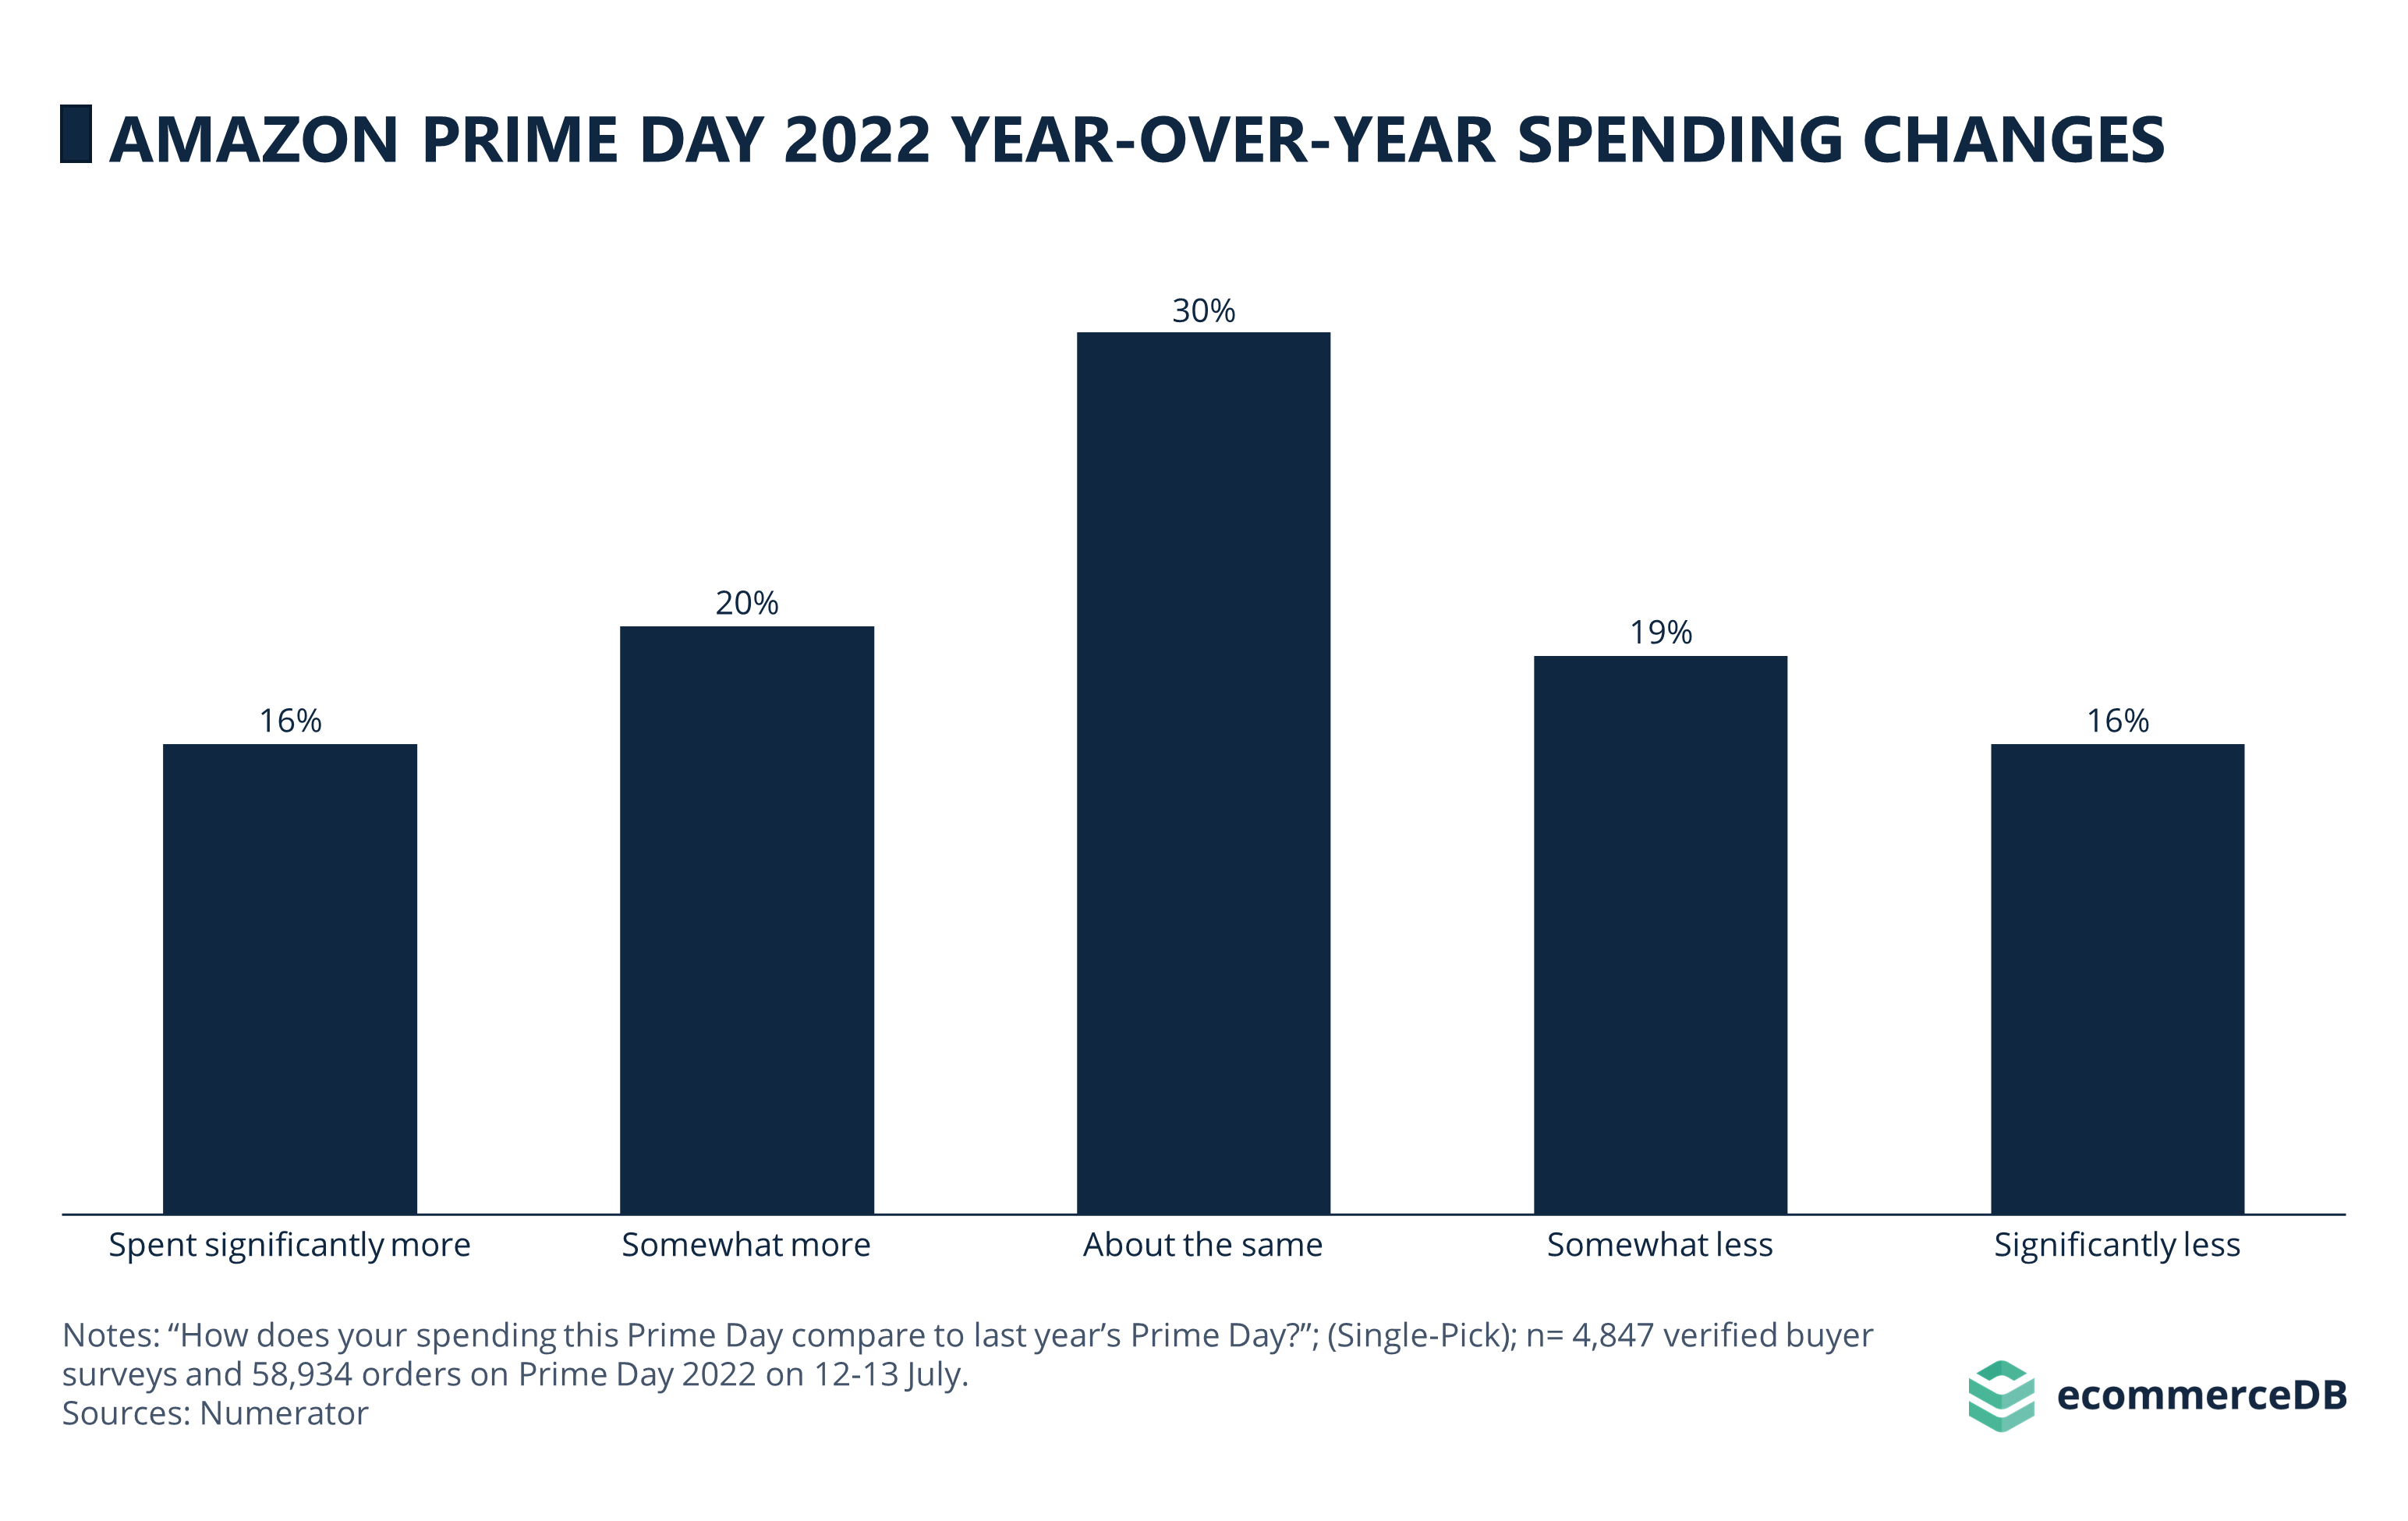 Prime Day Sales in 2022 Did Inflation Impact Amazon?